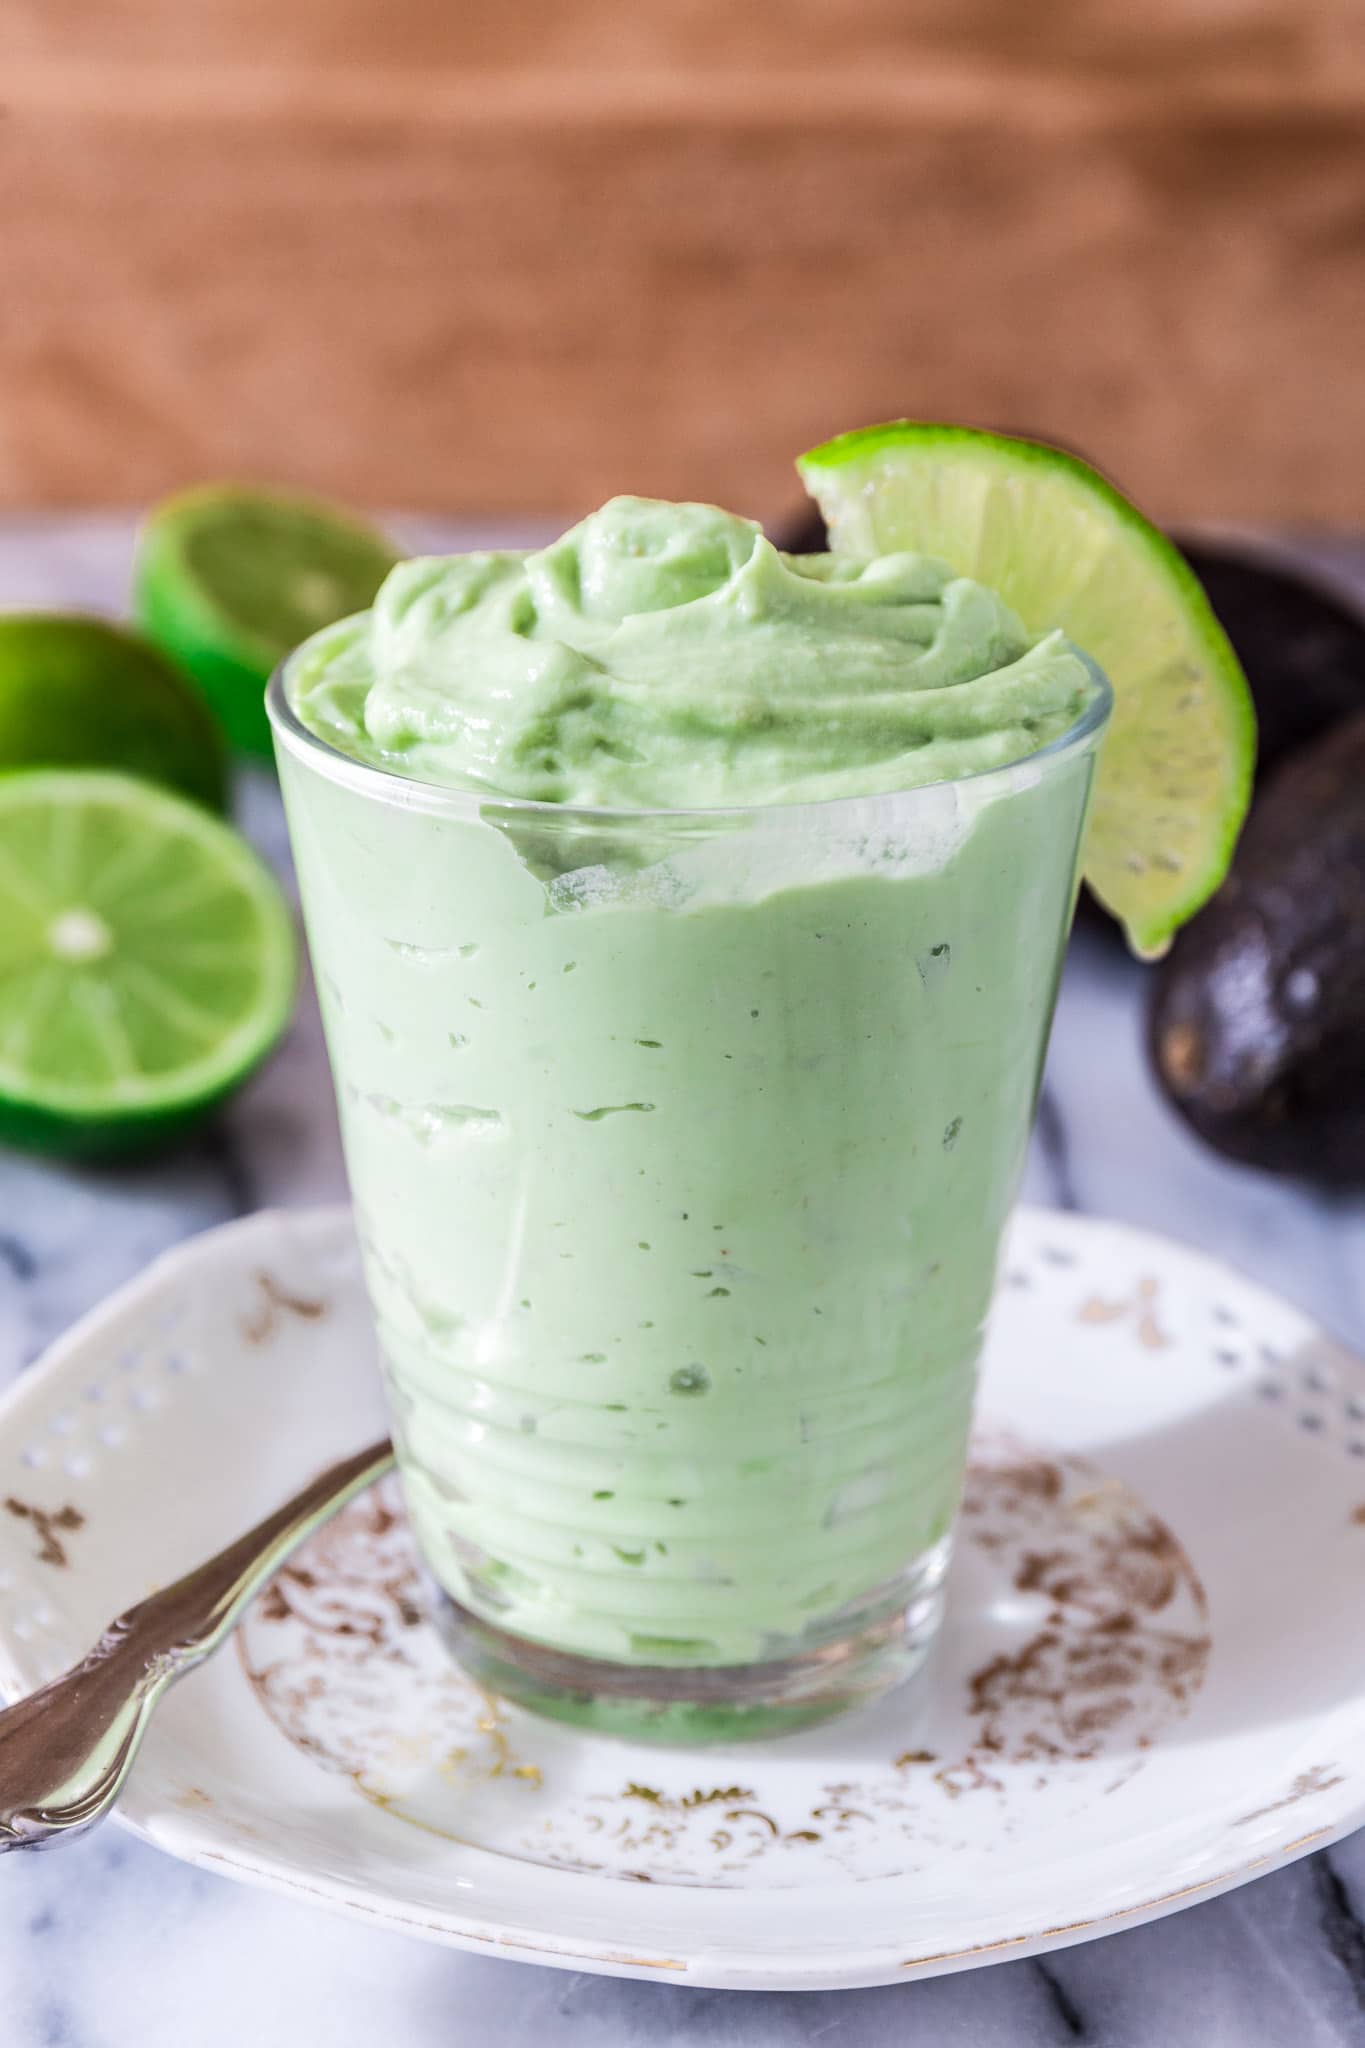 Raw Avocado Lime Mousse | www.oliviascuisine.com | Looking for a guilt free dessert? This Raw Avocado Lime Mousse will do the trick. Not only delicious but also heart check certified! ❤️️ Oh, and made with only 3 ingredients. What could be better than that?